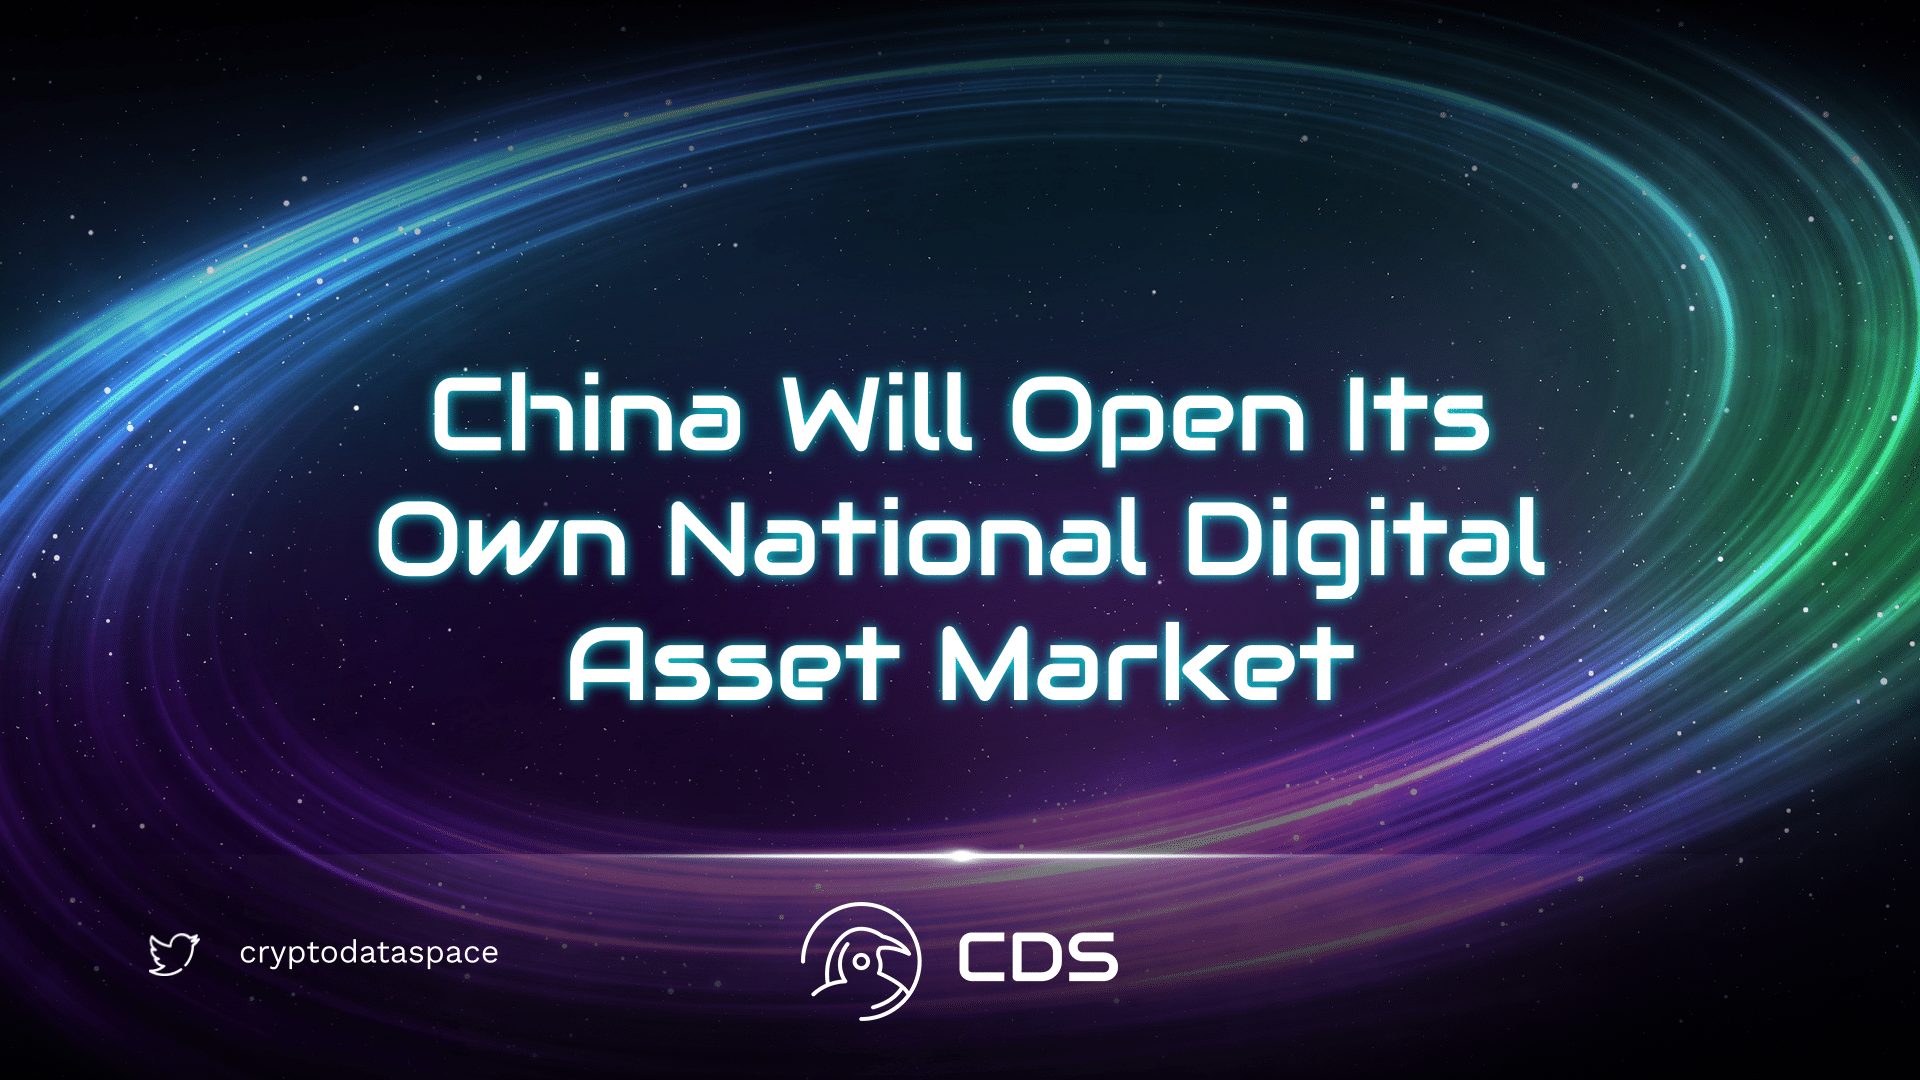 China Will Open Its Own National Digital Asset Market